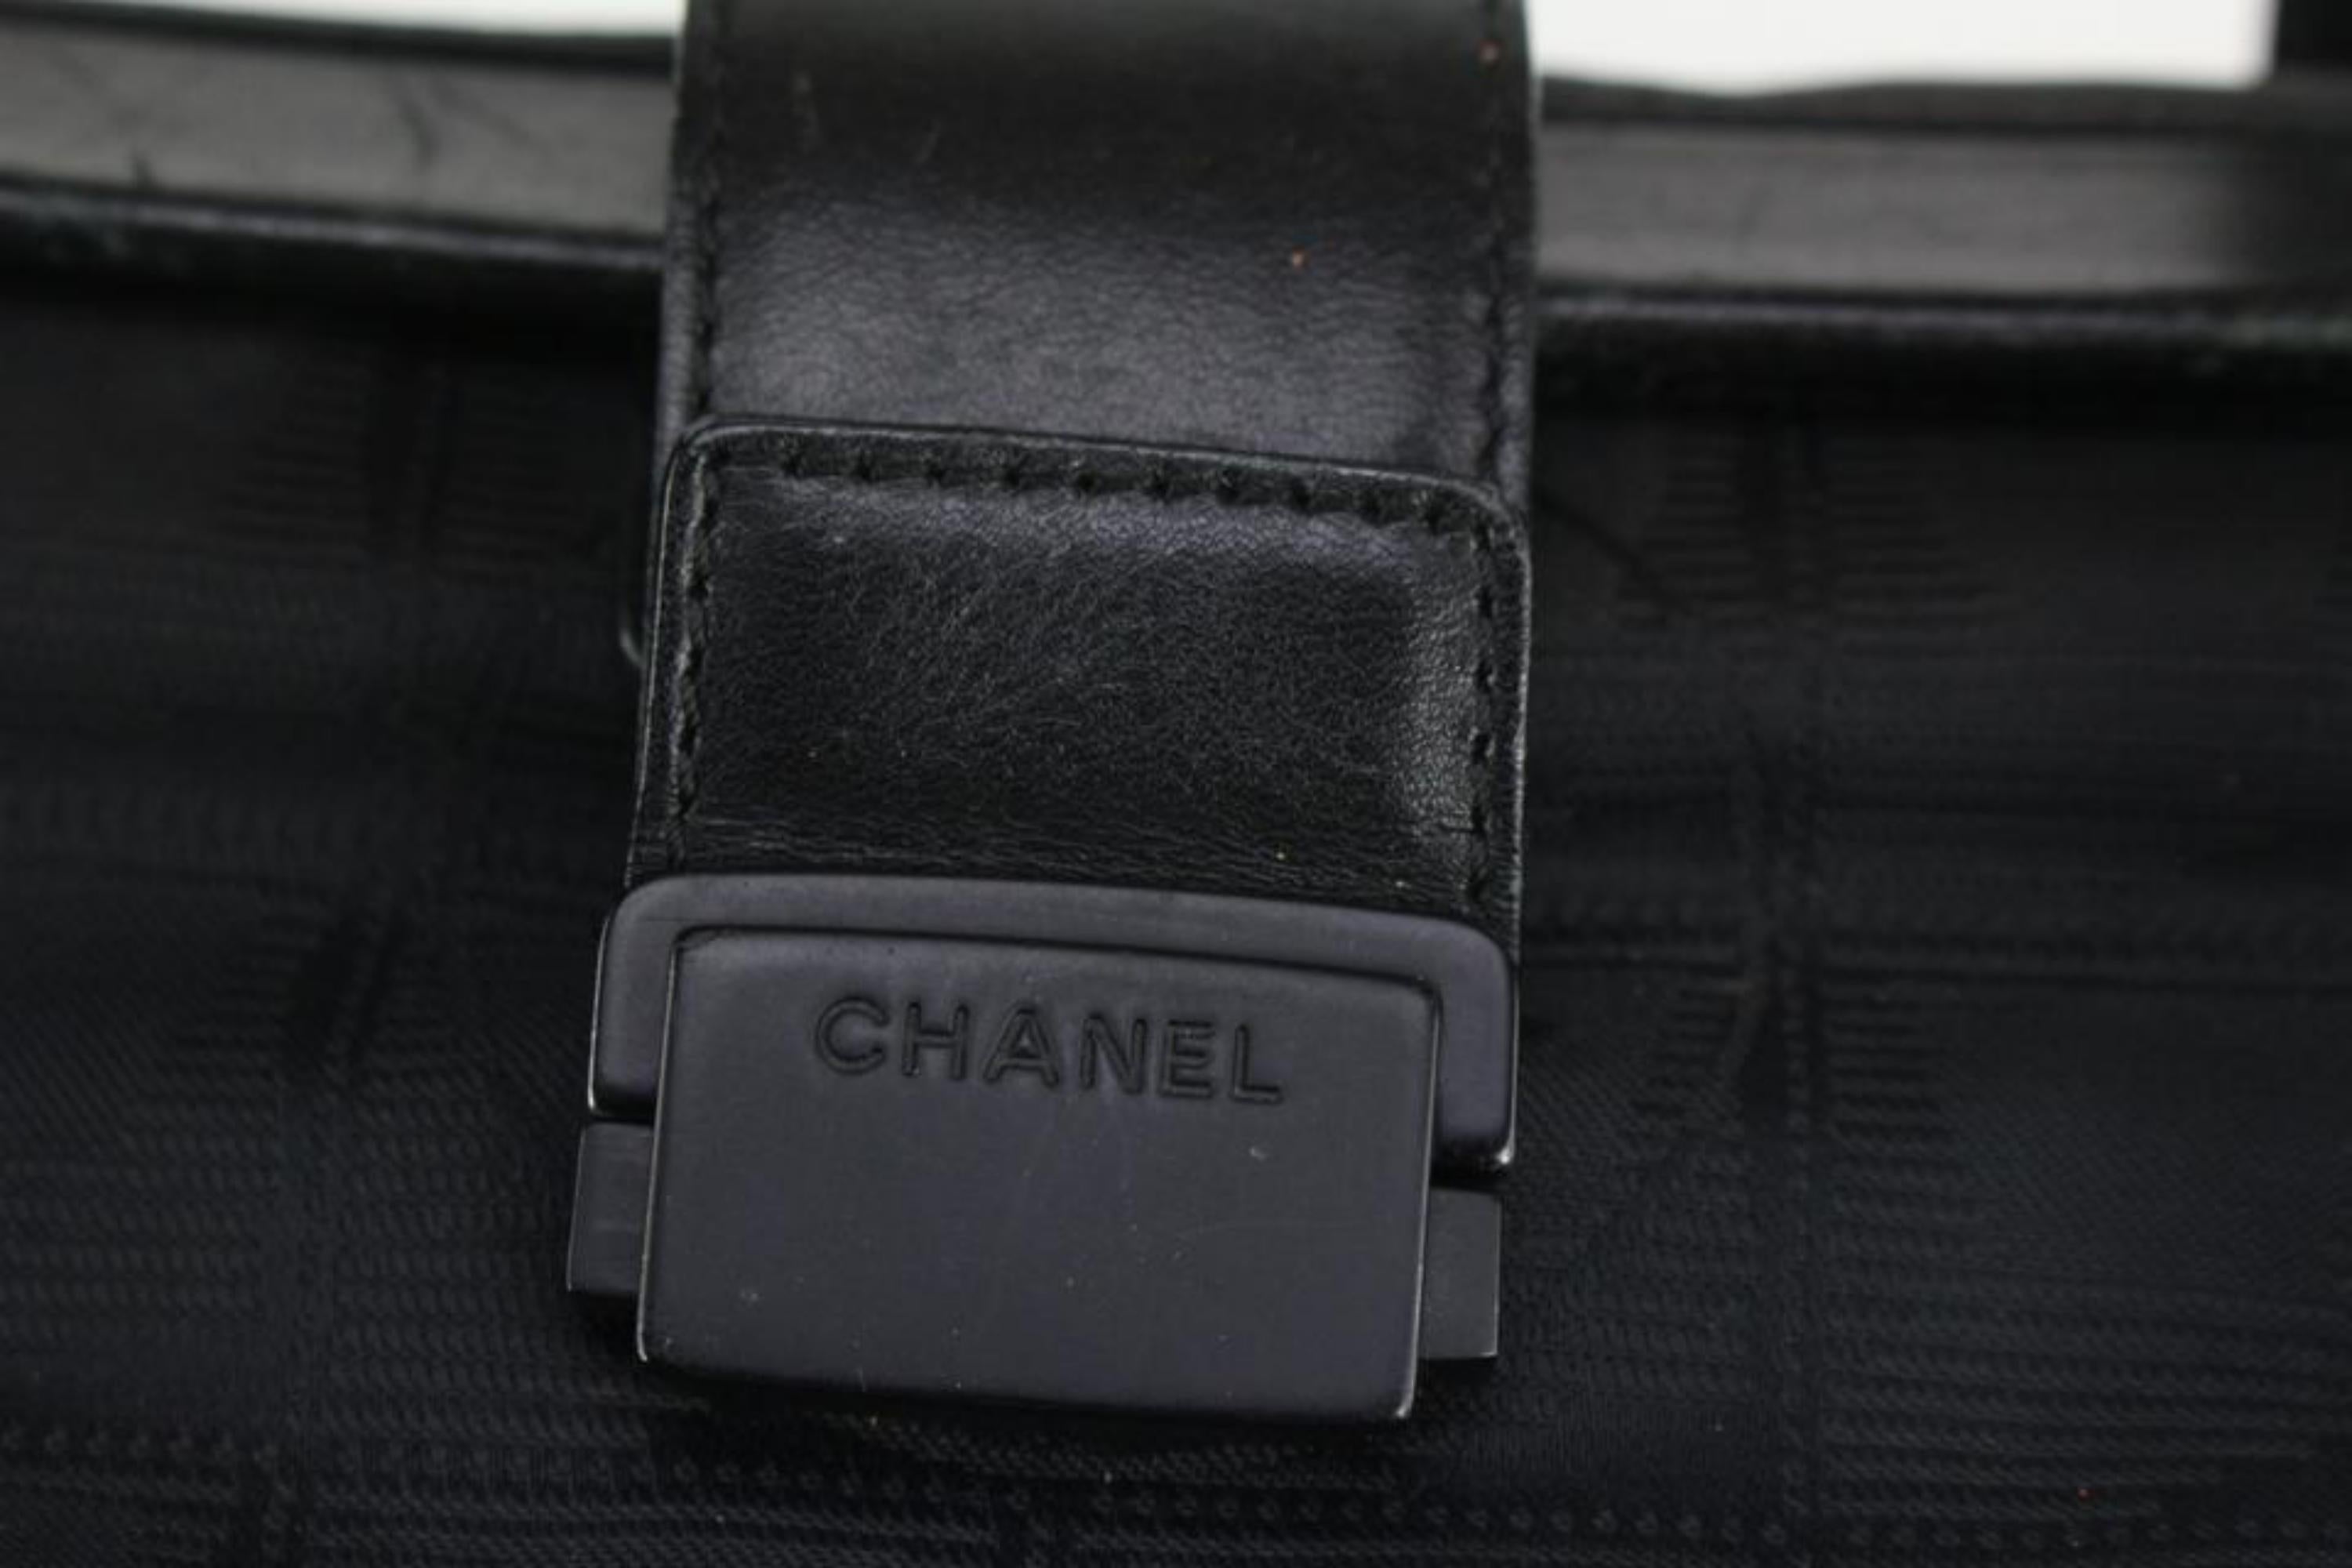 Women's Chanel Black New Line Travel Bag with Shoe Compartment 122c18 For Sale